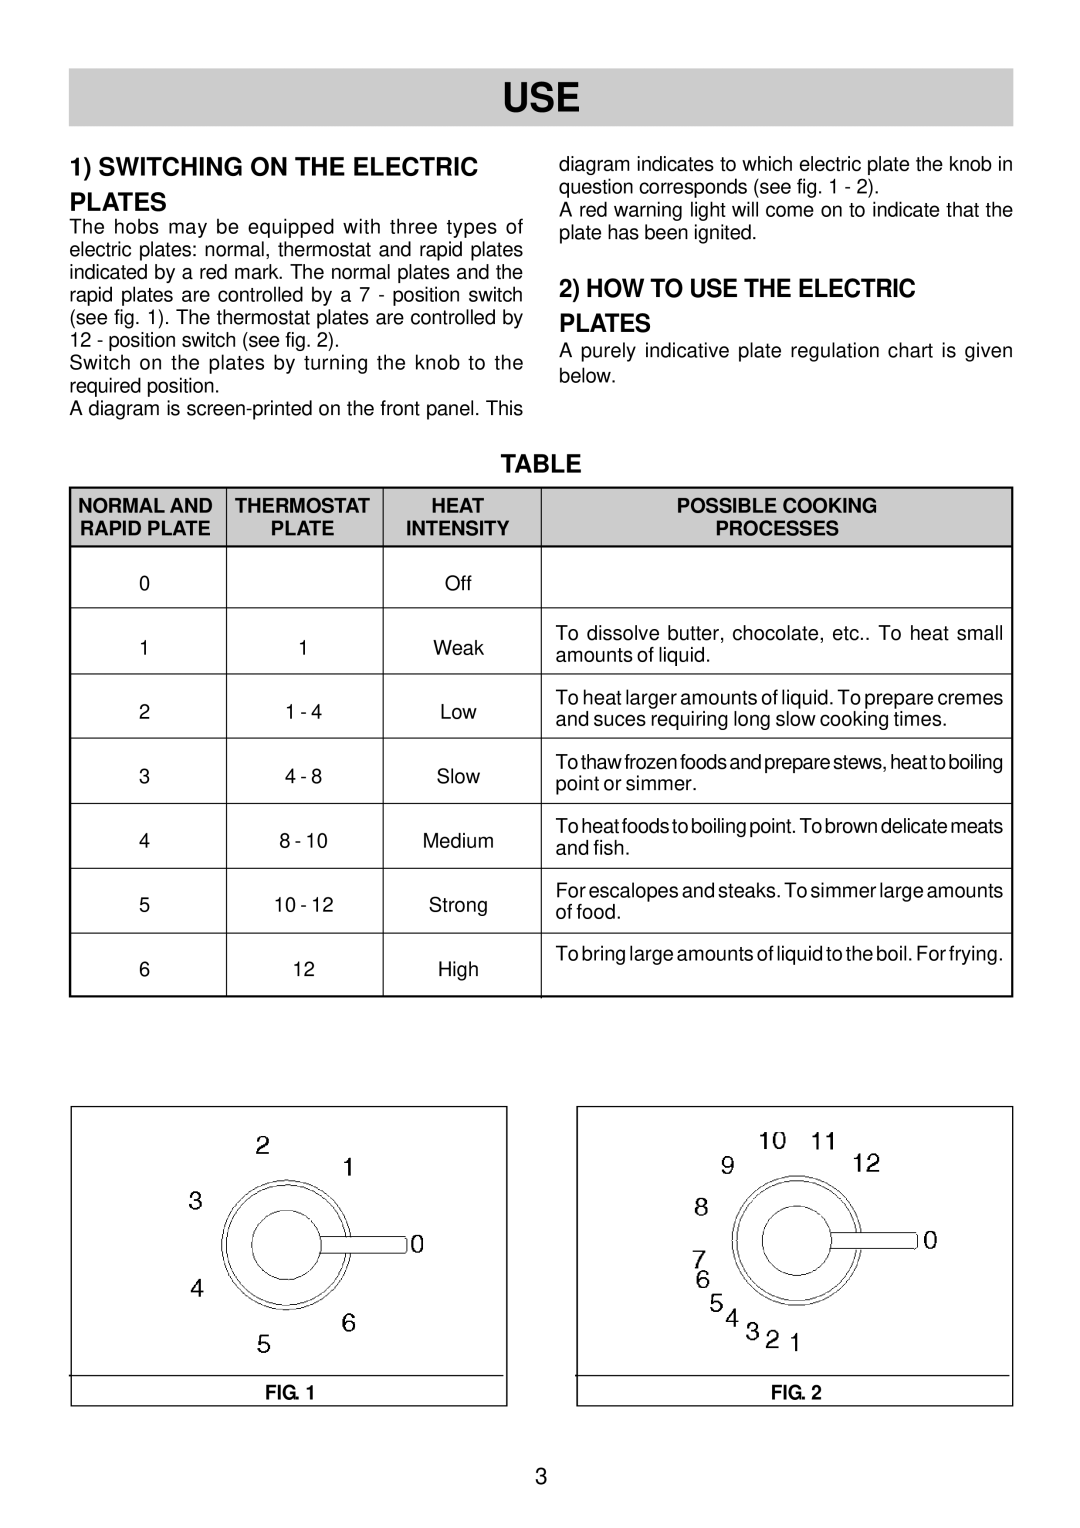 Smeg SA435X-1 Switching On The Electric Plates, How To Use The Electric Plates, Normal And, Thermostat, Heat, Processes 